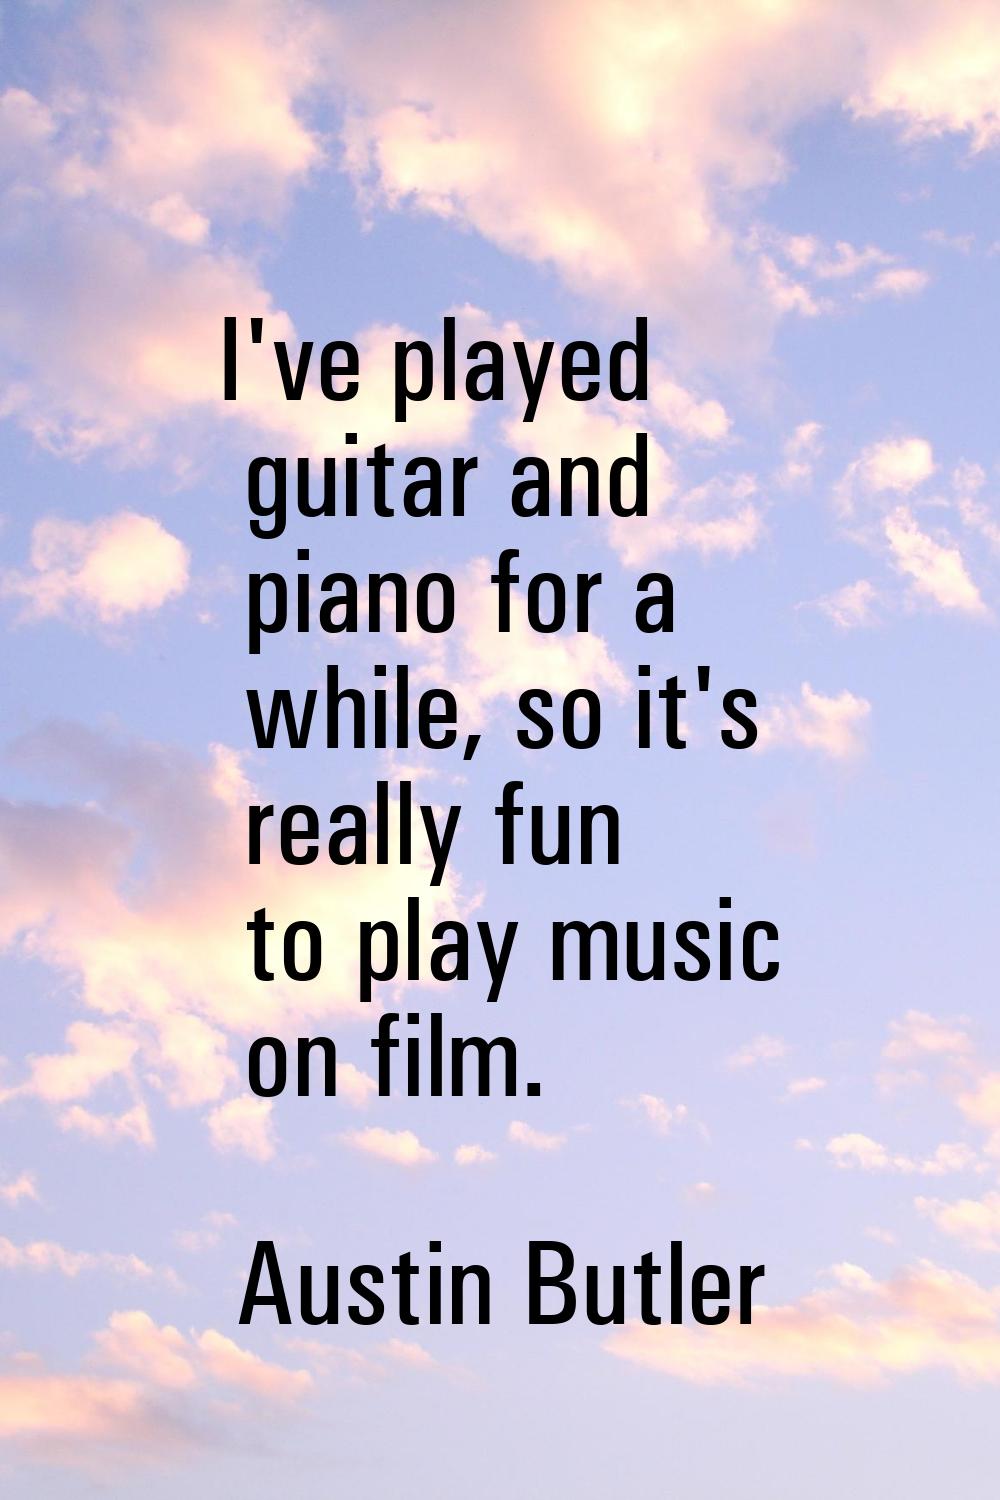 I've played guitar and piano for a while, so it's really fun to play music on film.